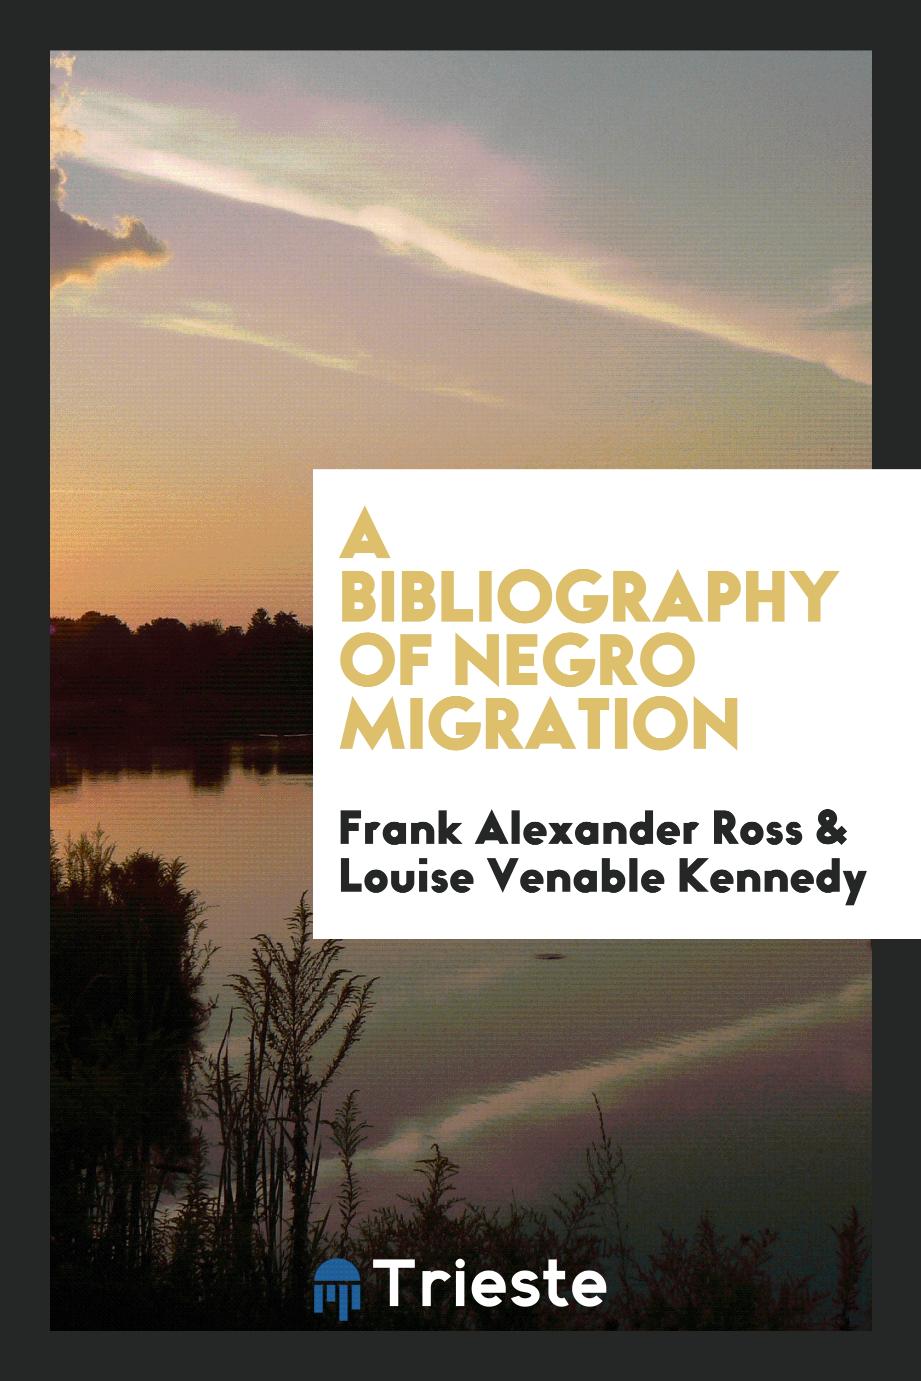 A bibliography of Negro migration